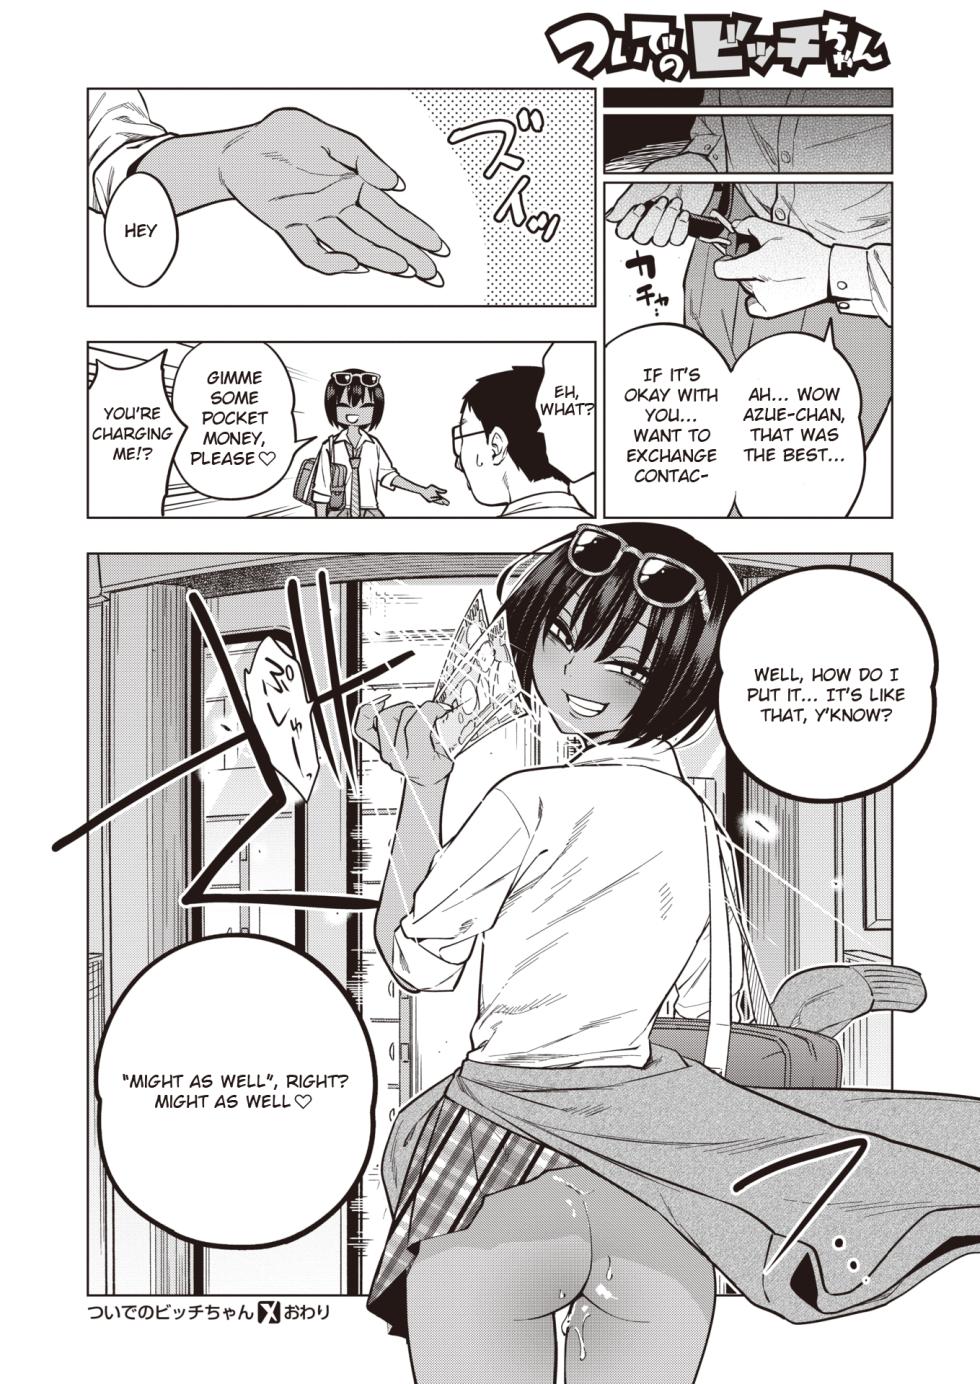 [Gujira] "Might As Well" Bitch-chan [English] [rollcake scans] - Page 26